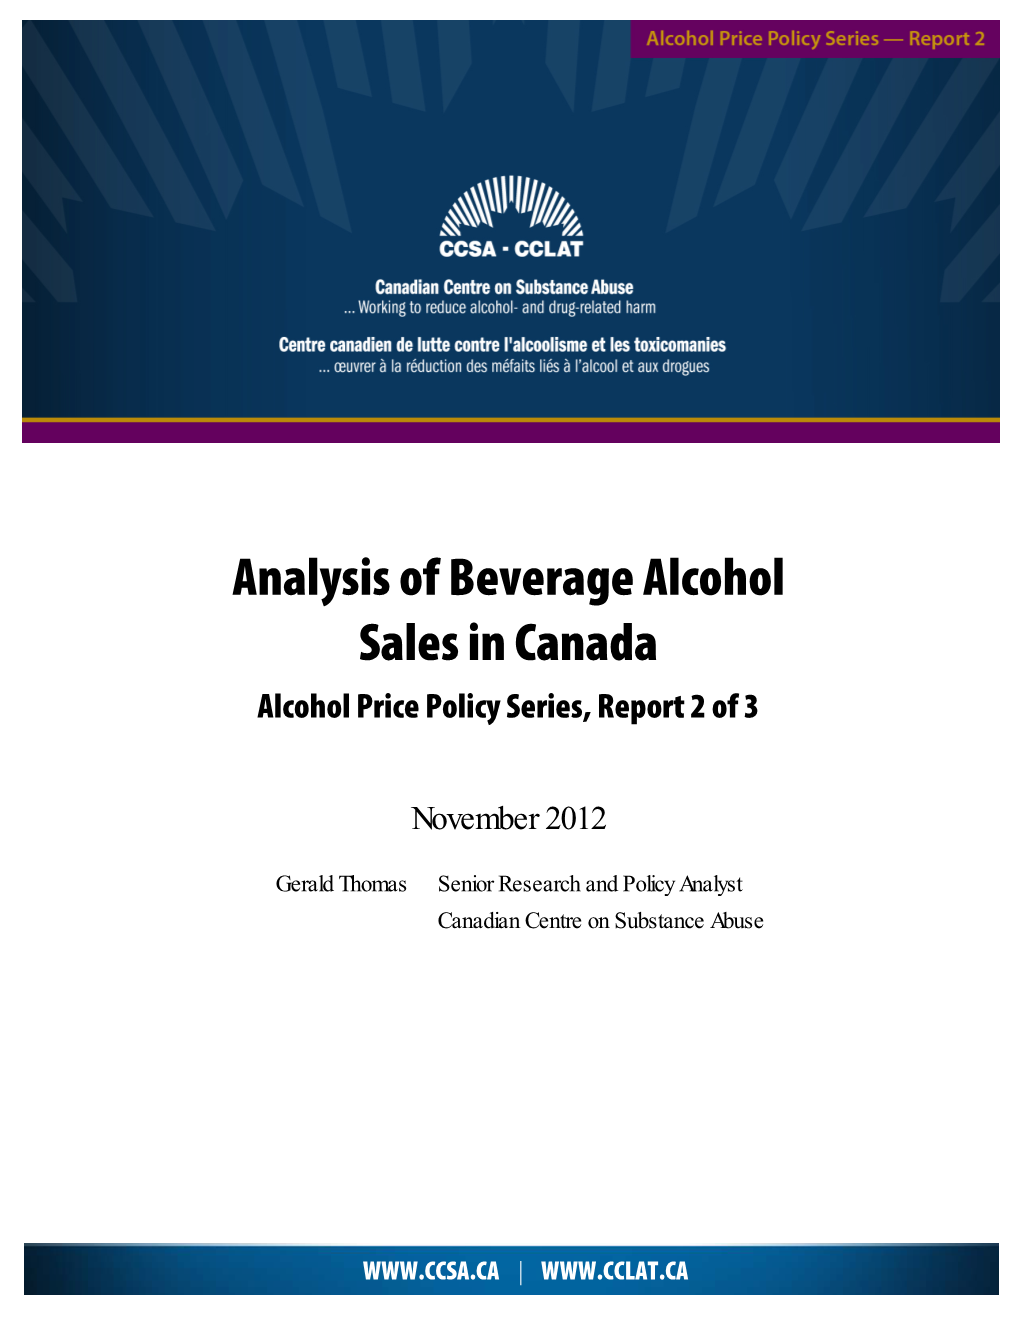 Analysis of Beverage Alcohol Sales in Canada Alcohol Price Policy Series, Report 2 of 3